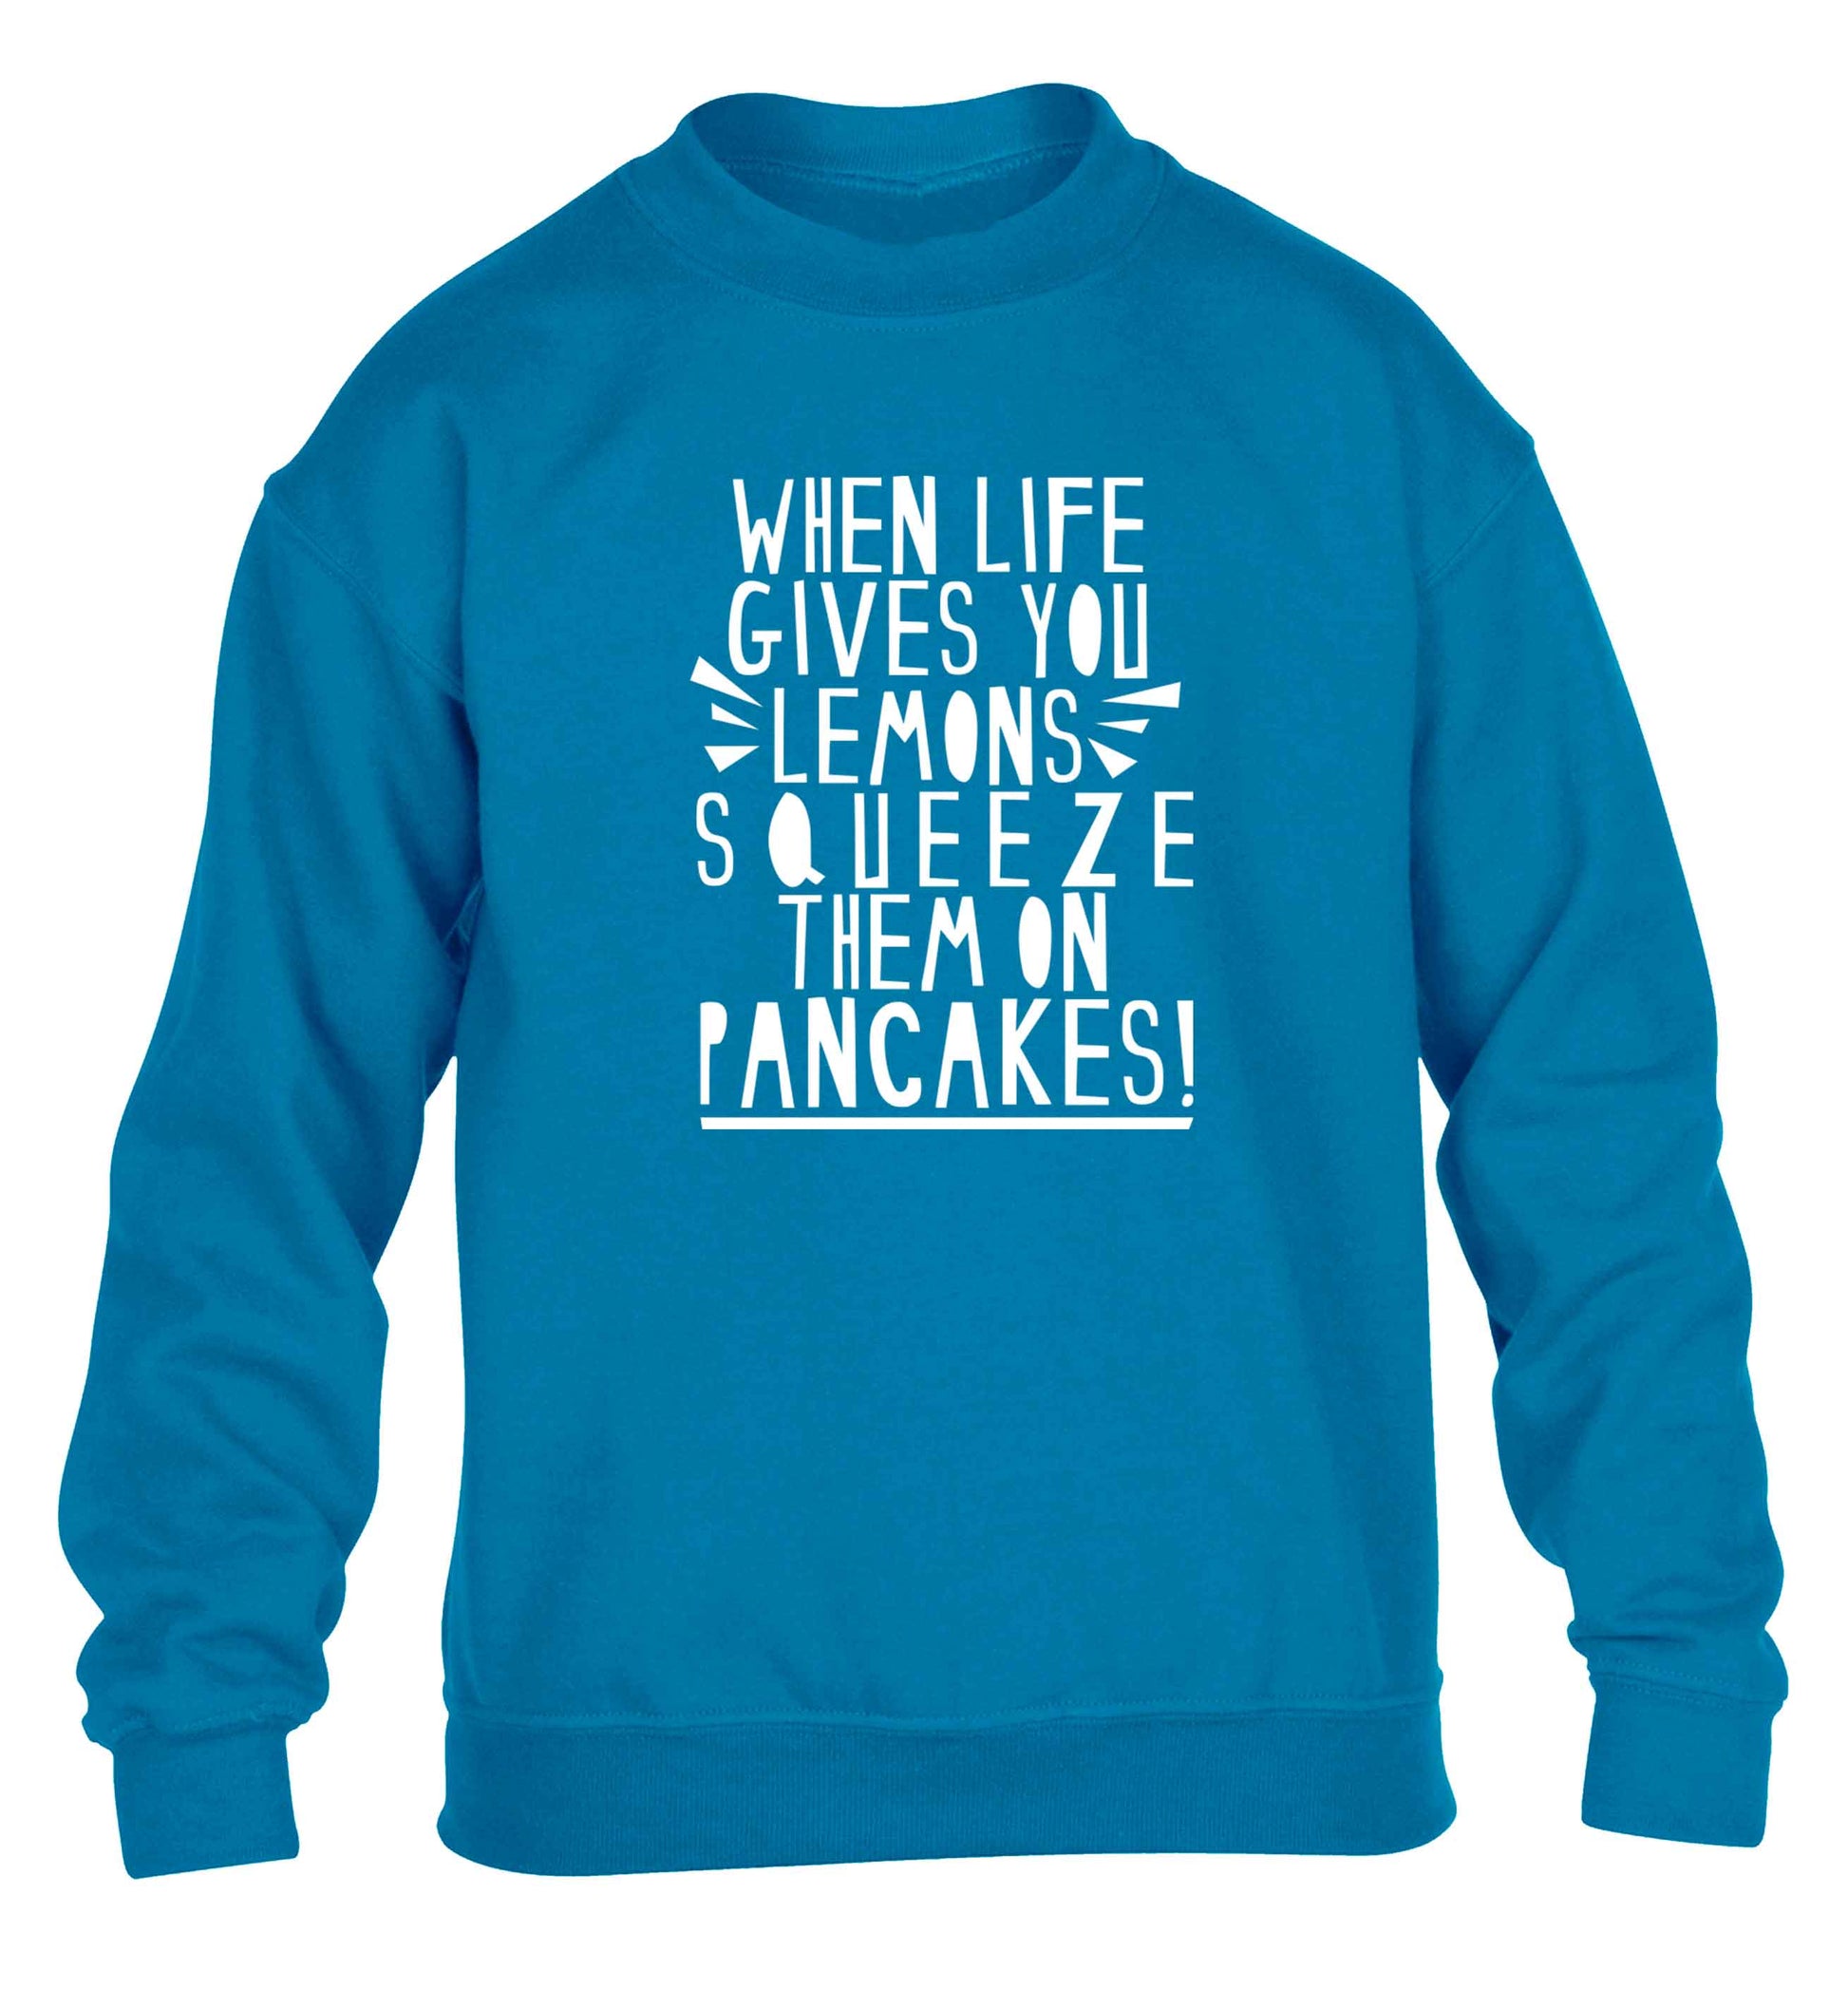 When life gives you lemons squeeze them on pancakes! children's blue sweater 12-13 Years